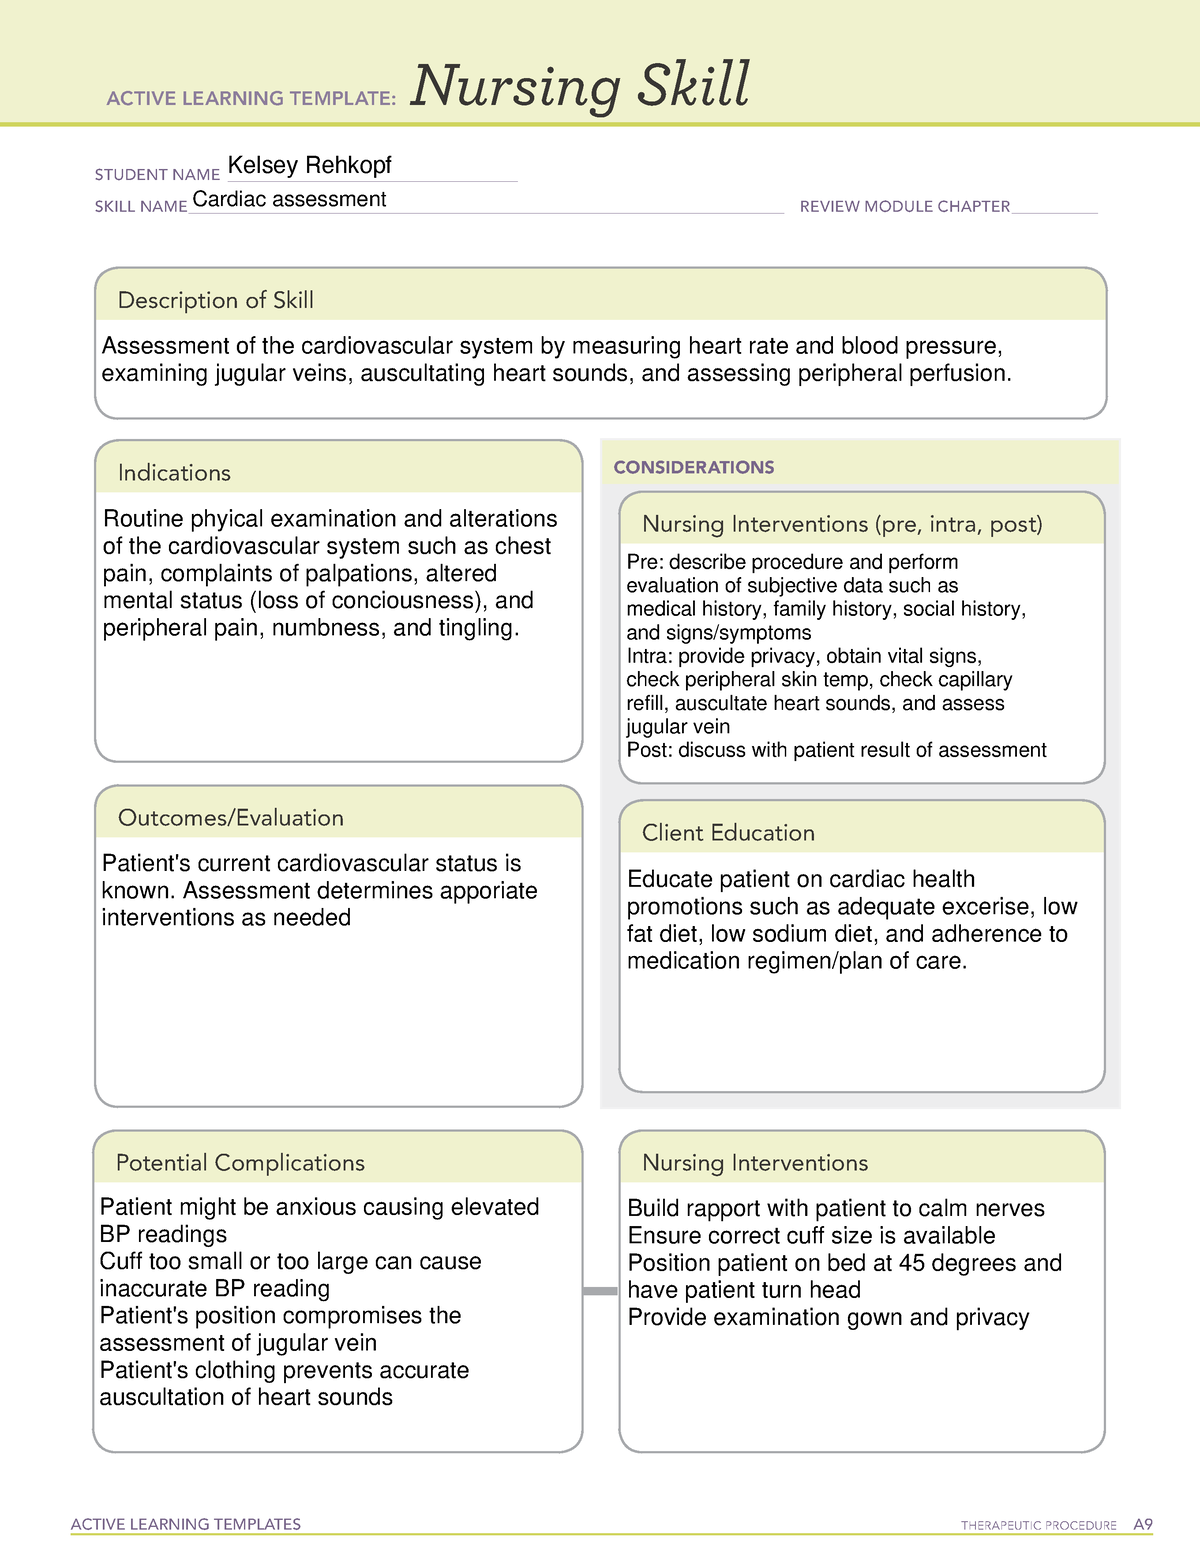 Cardiac Assessment ATI Active Learning Template ACTIVE LEARNING 